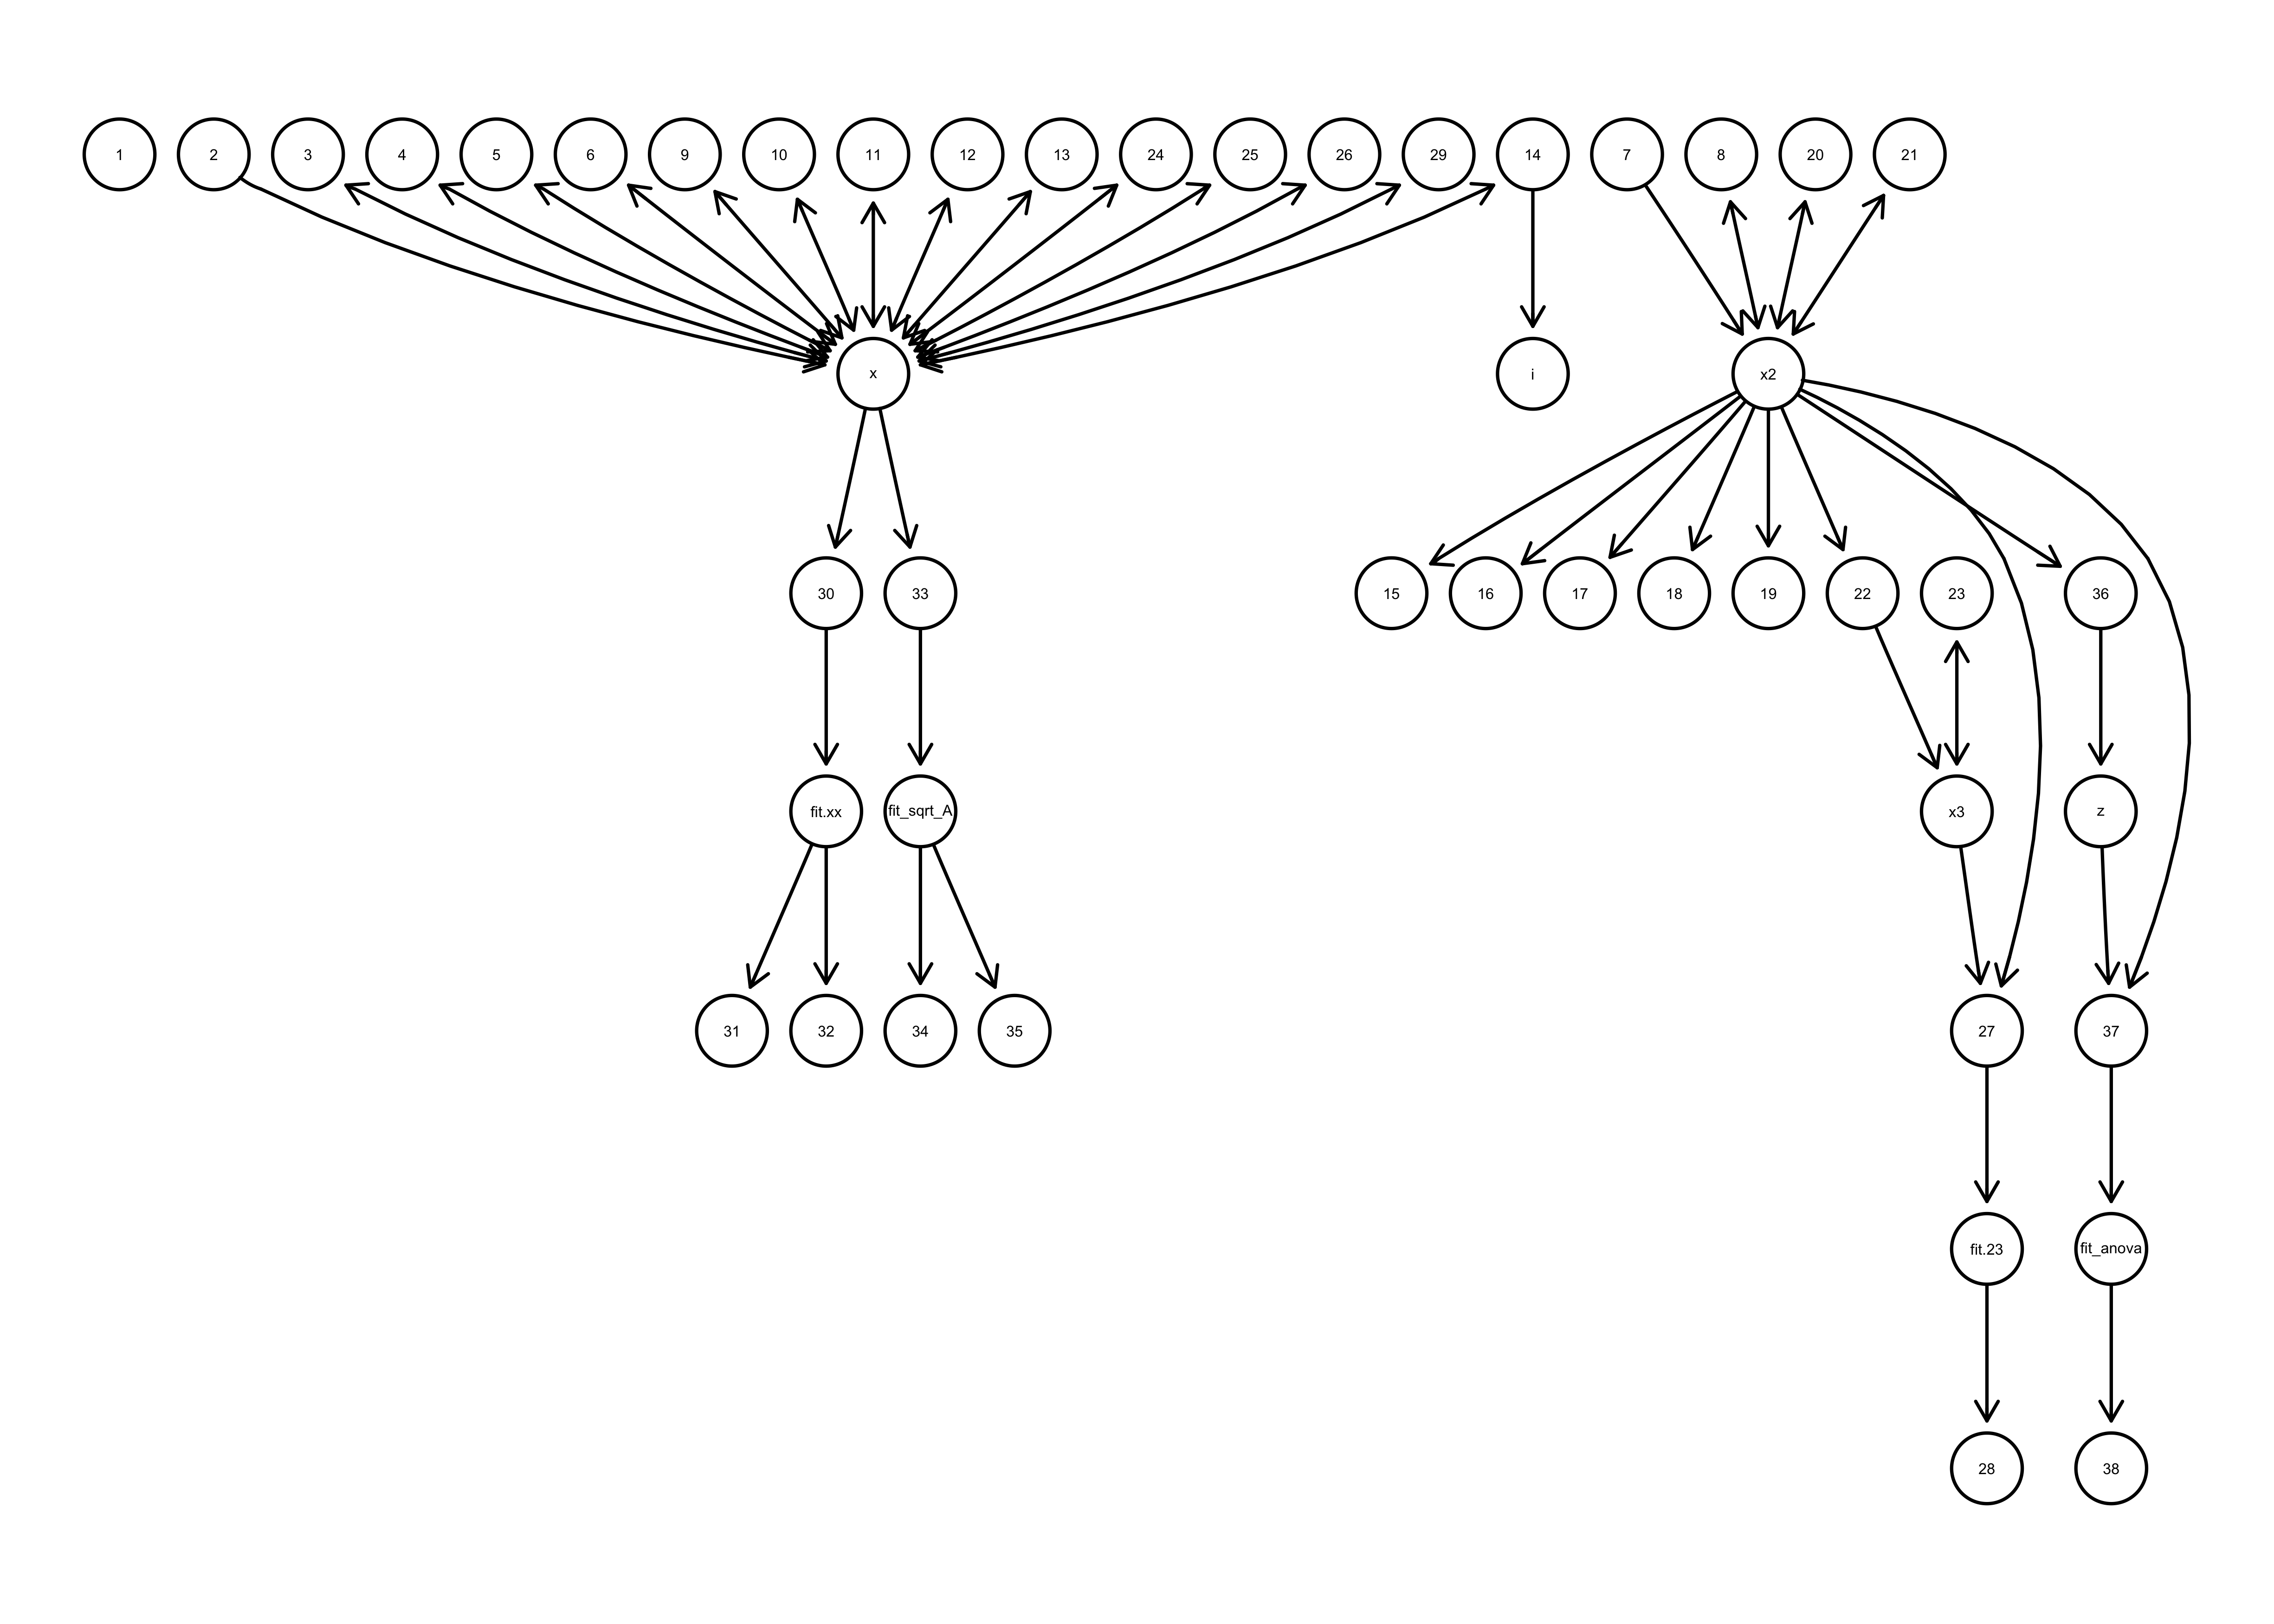 code_graph example showing a network graph of function and variable dependencies.